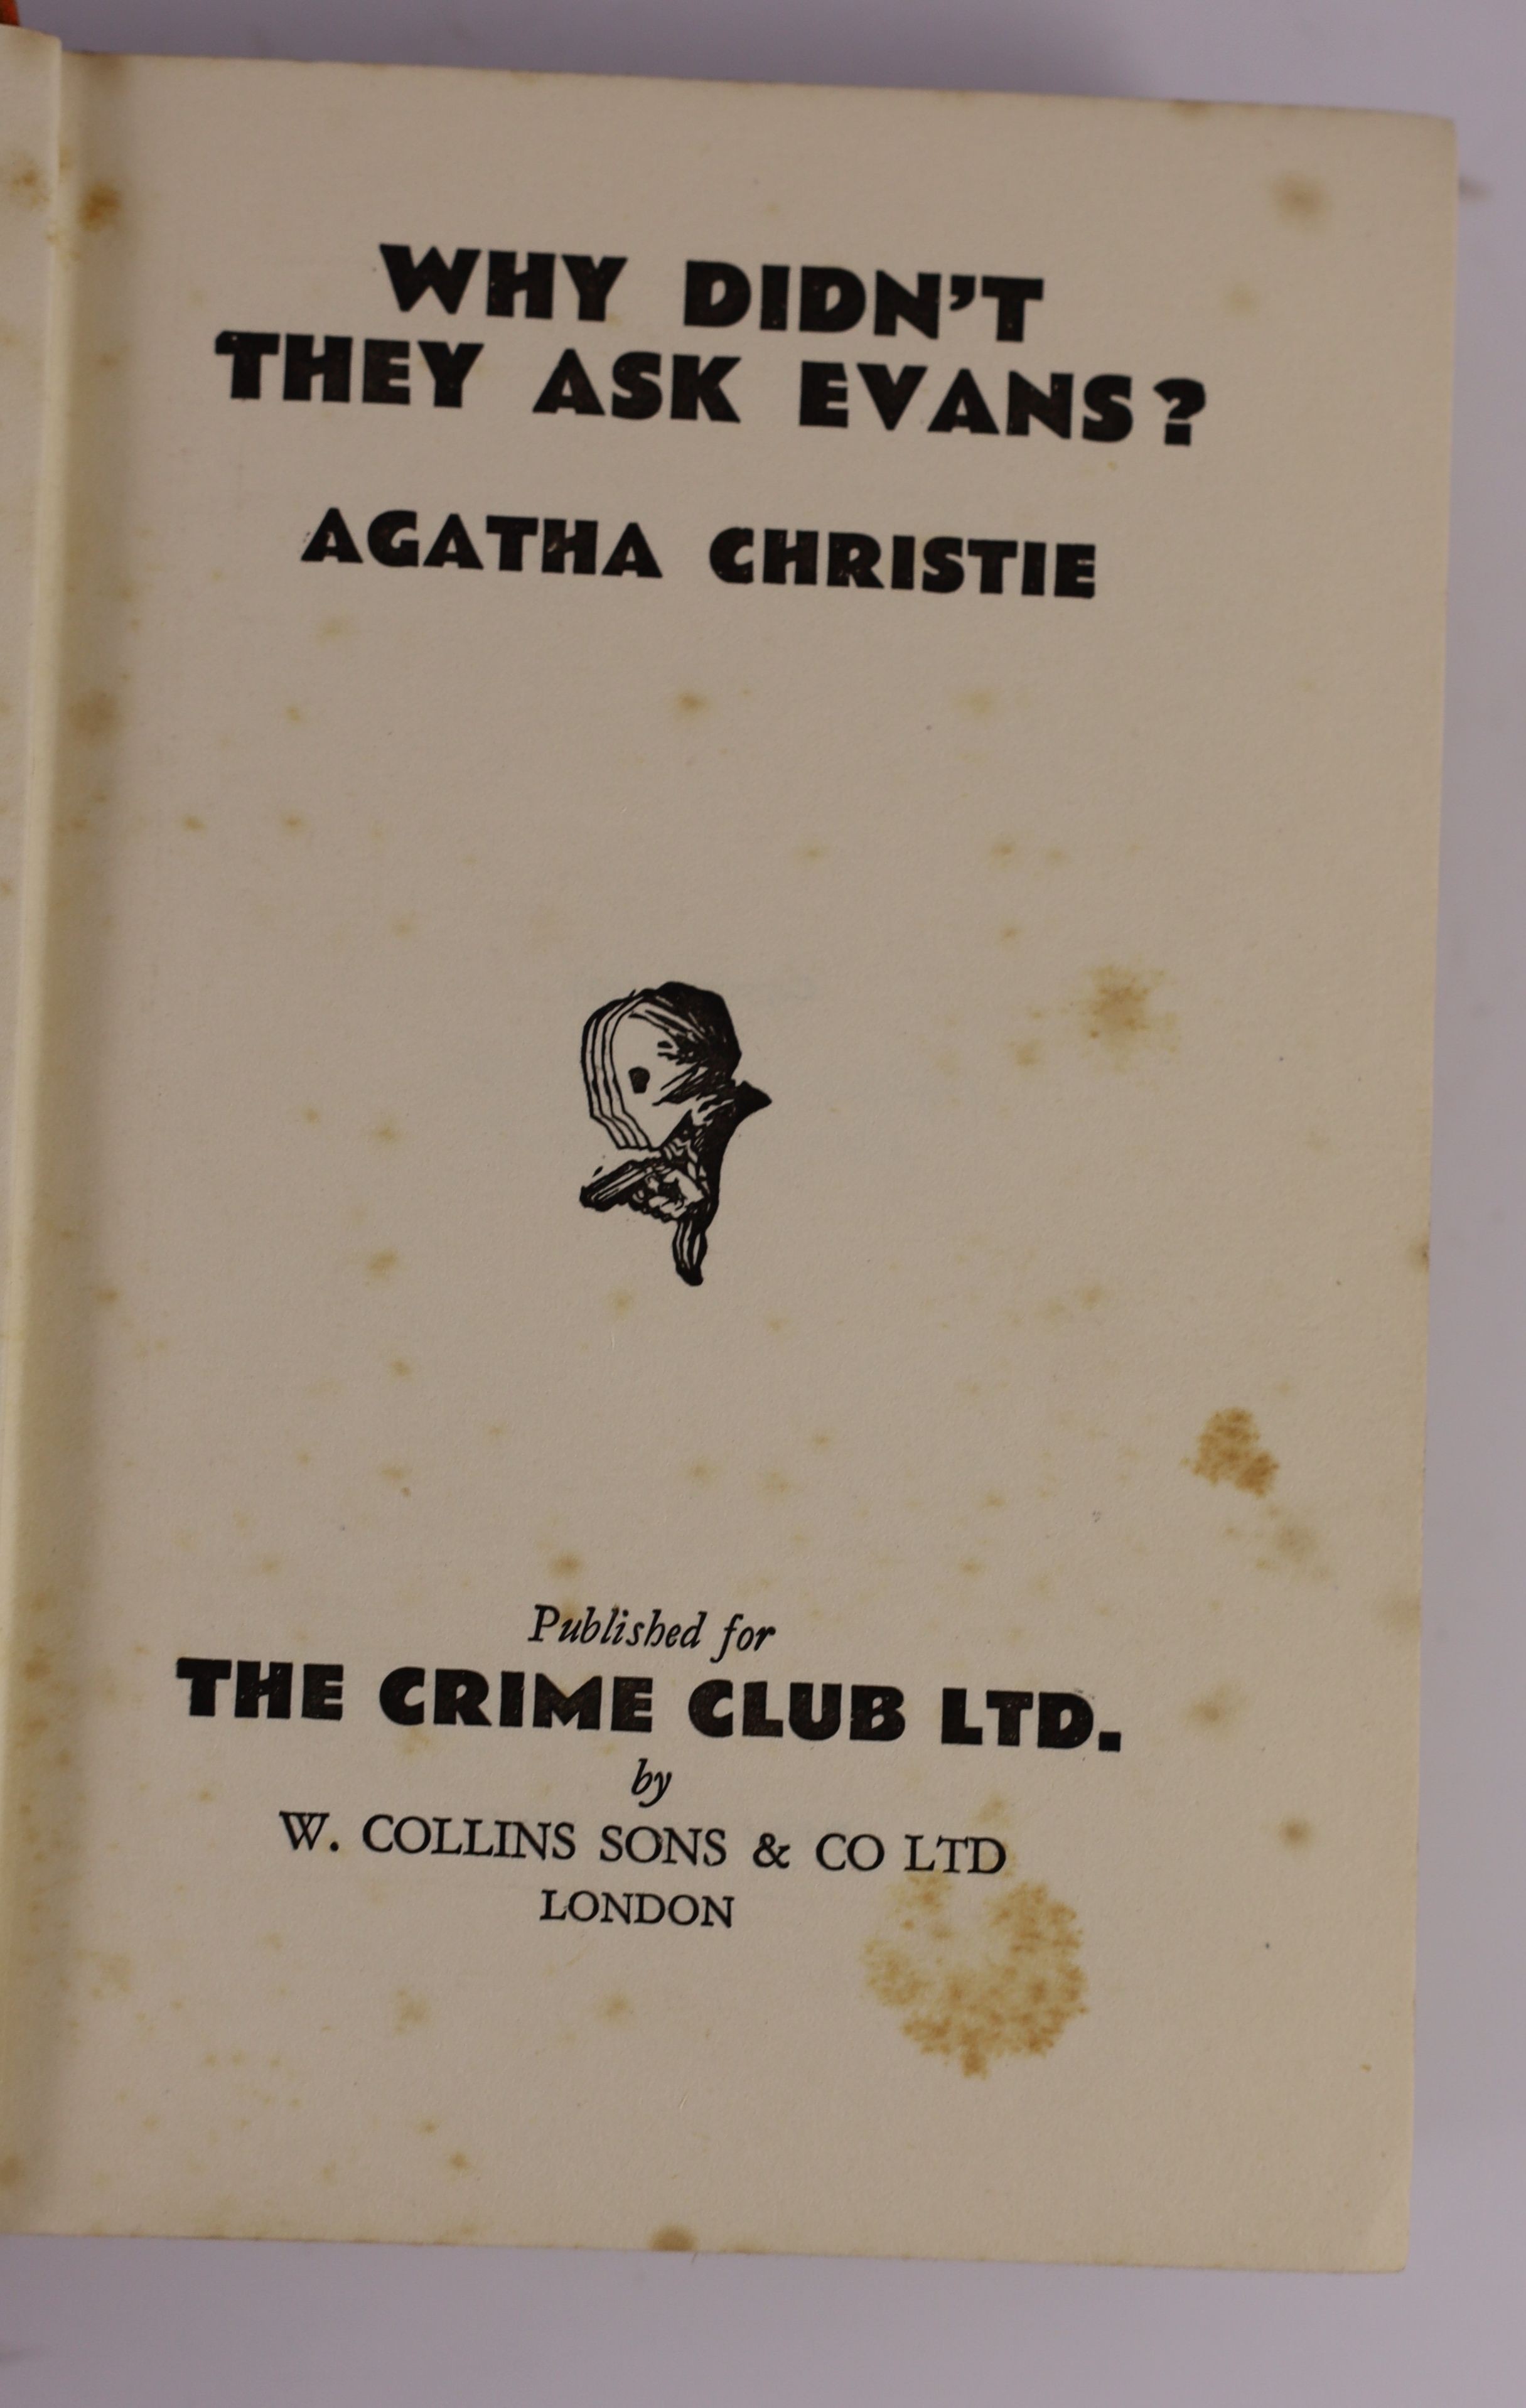 Christie, Agatha - Why Didn't They Ask Evans?, 1st edition